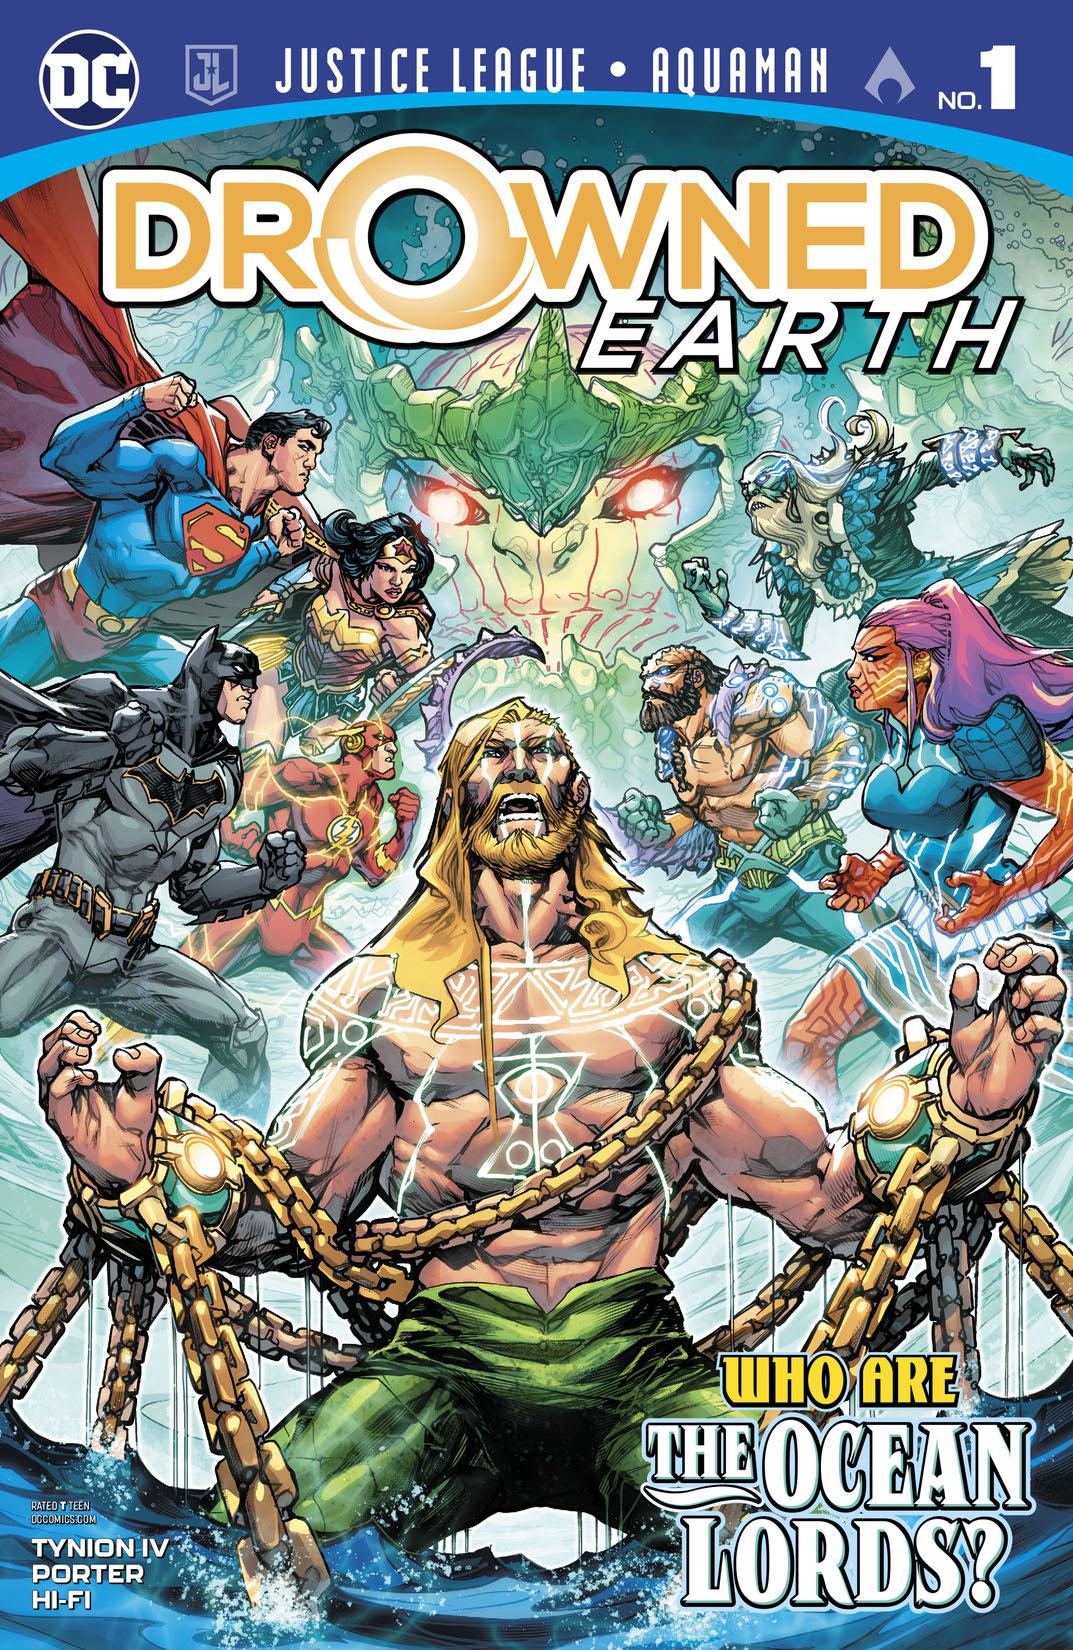 Justice League/Aquaman: Drowned Earth Special (2018-) #1 preview images